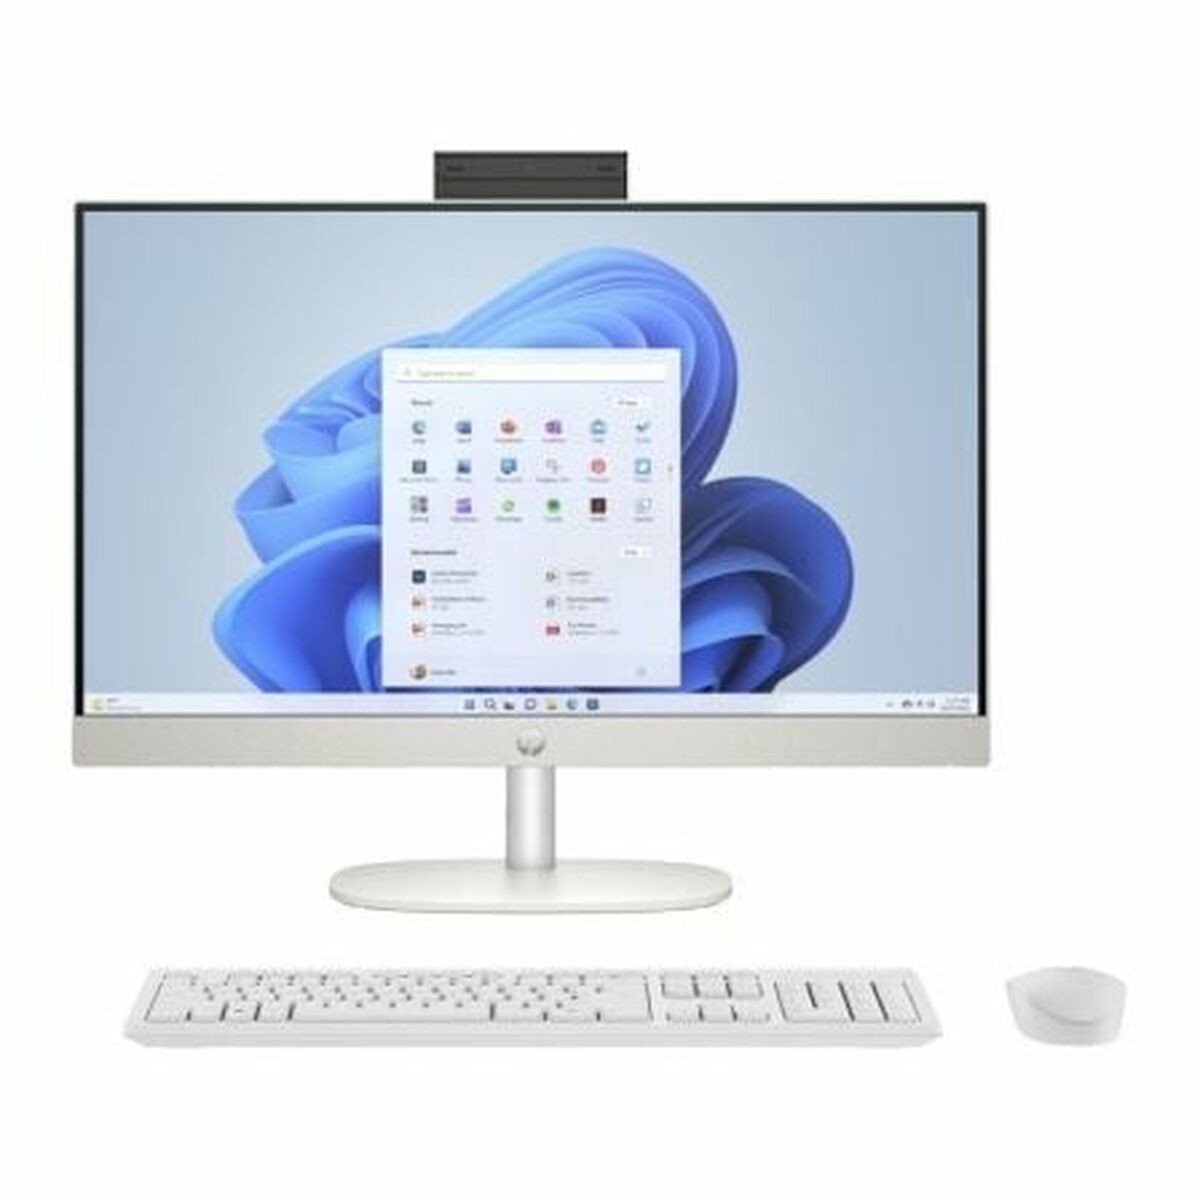 All in One HP 24-CR0071NS 24" 16 GB RAM 512 GB SSD AMD Ryzen 5 7520U, HP, Computing, Desktops, all-in-one-hp-24-cr0071ns-24-16-gb-ram-512-gb-ssd-amd-ryzen-5-7520u, Brand_HP, category-reference-2609, category-reference-2791, category-reference-2792, category-reference-t-19685, category-reference-t-19903, category-reference-t-21380, computers / components, Condition_NEW, office, Price_700 - 800, Teleworking, RiotNook